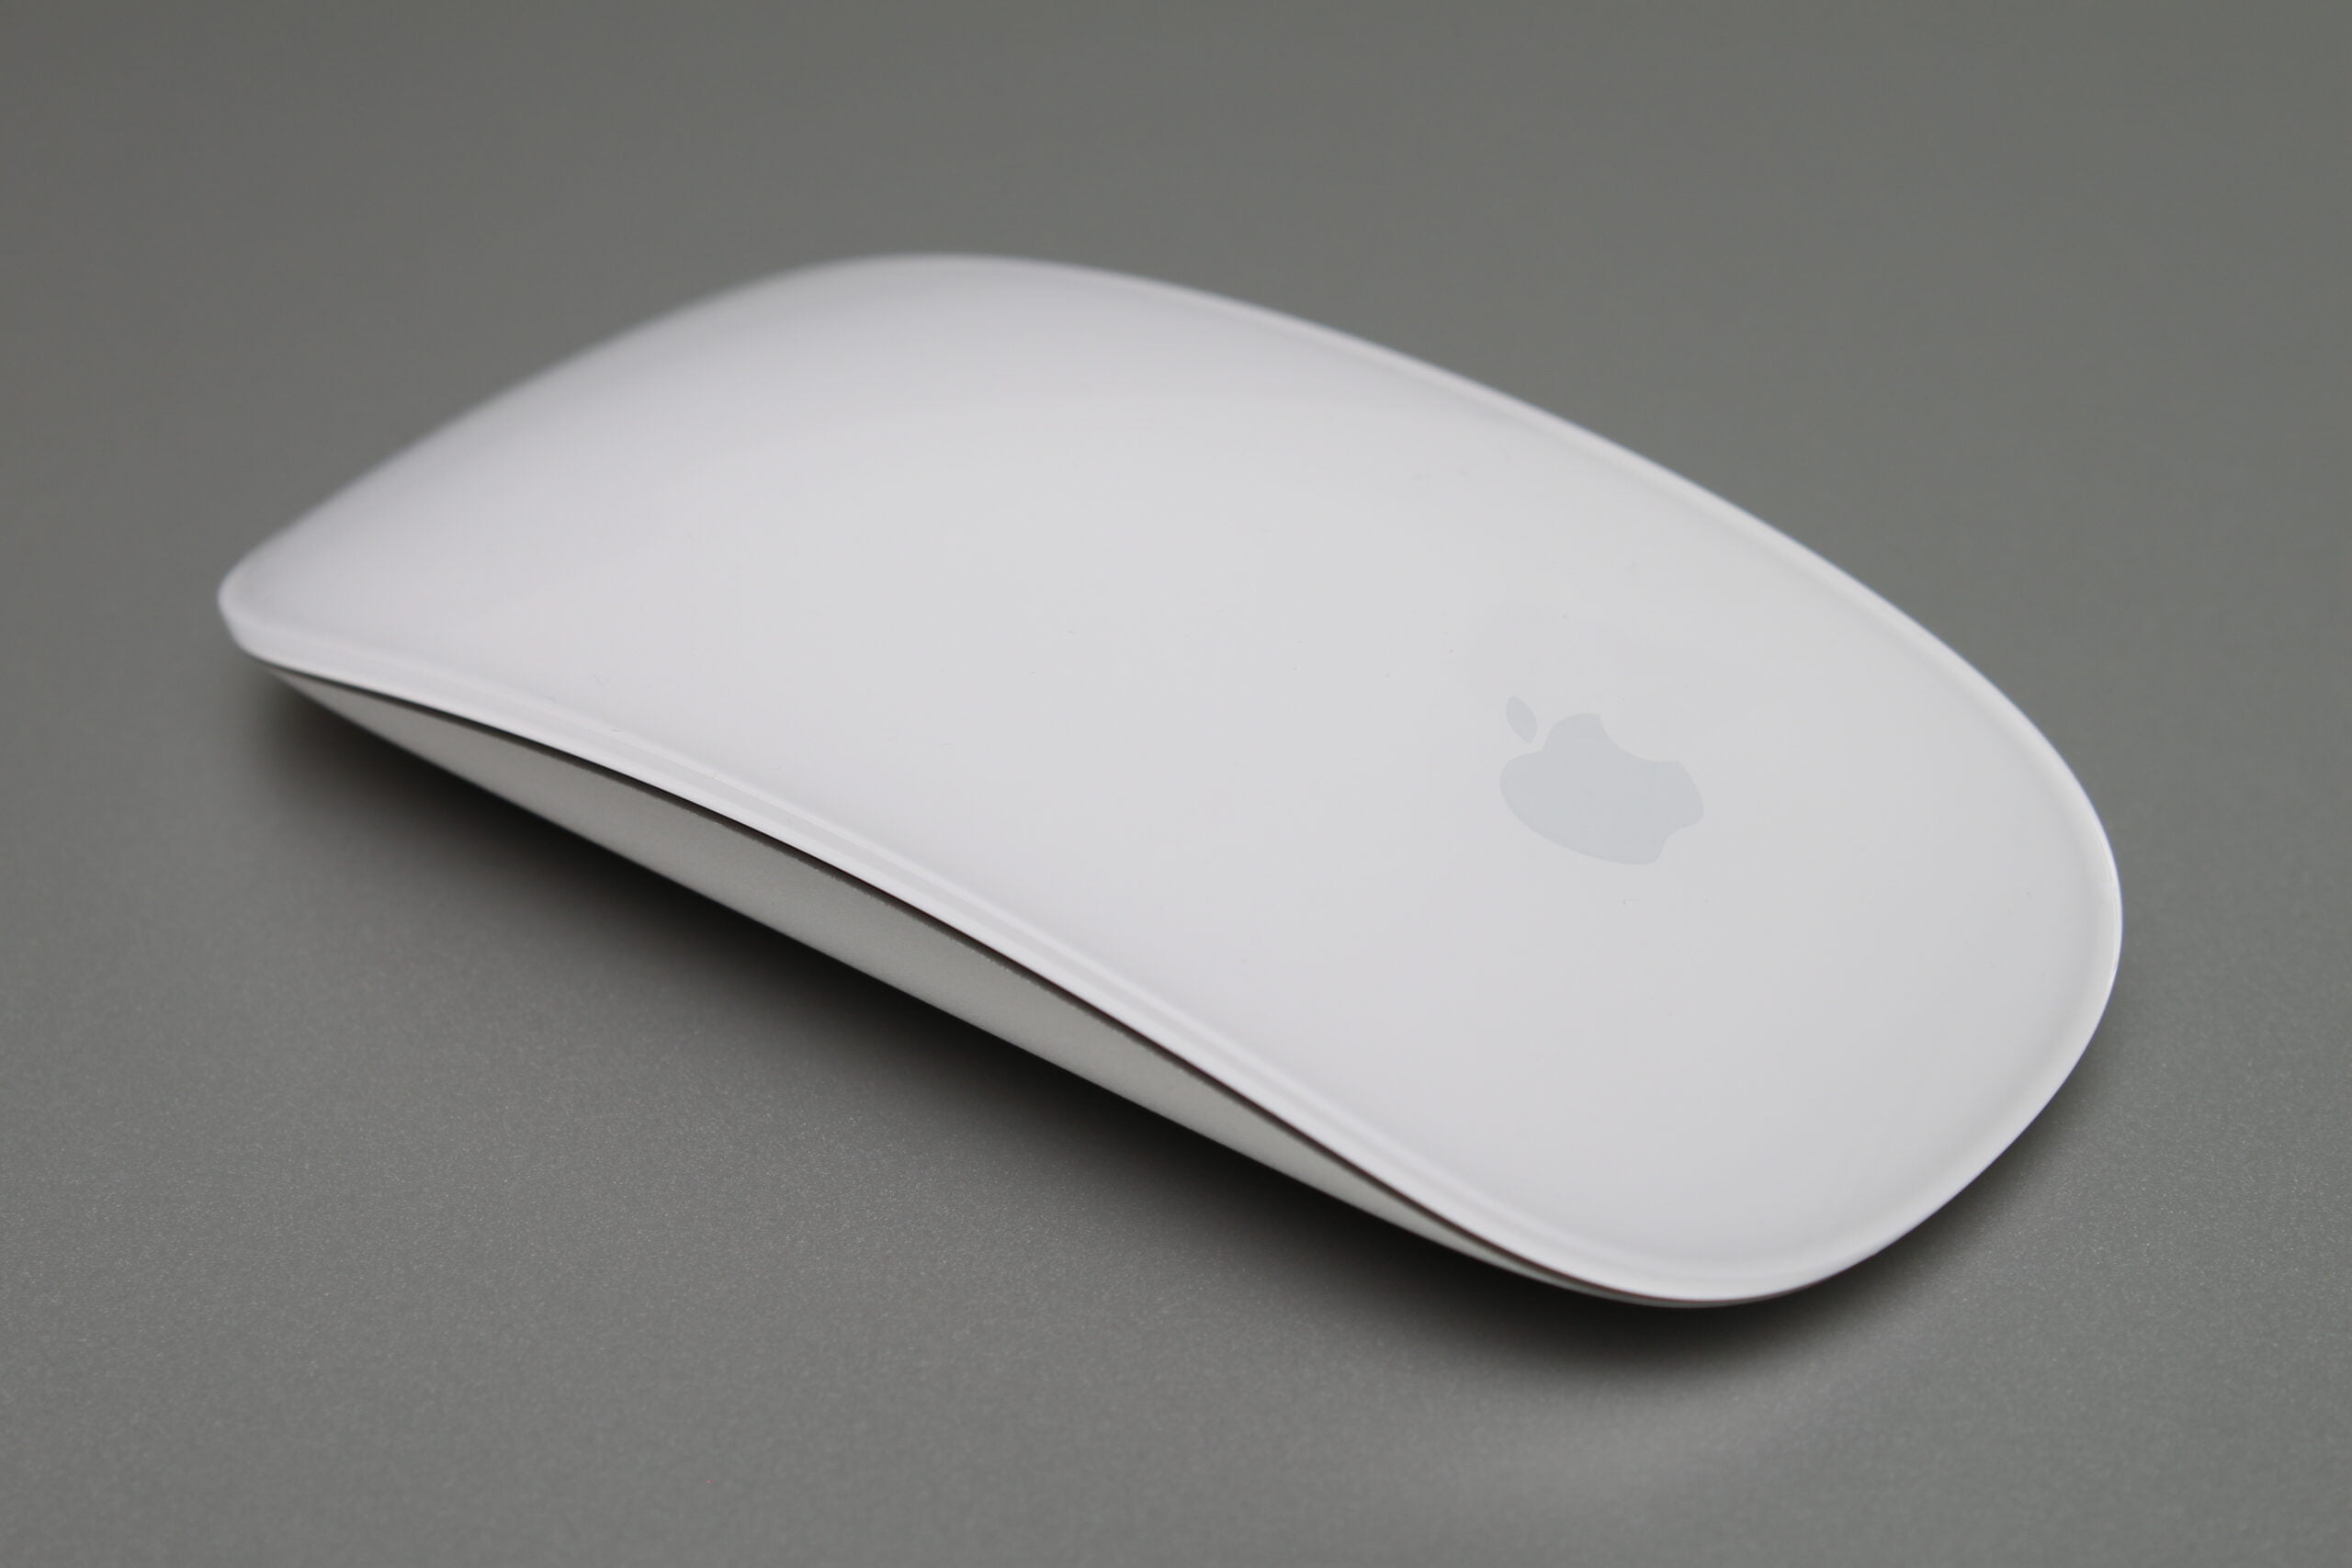 apple magic mouse pros and cons